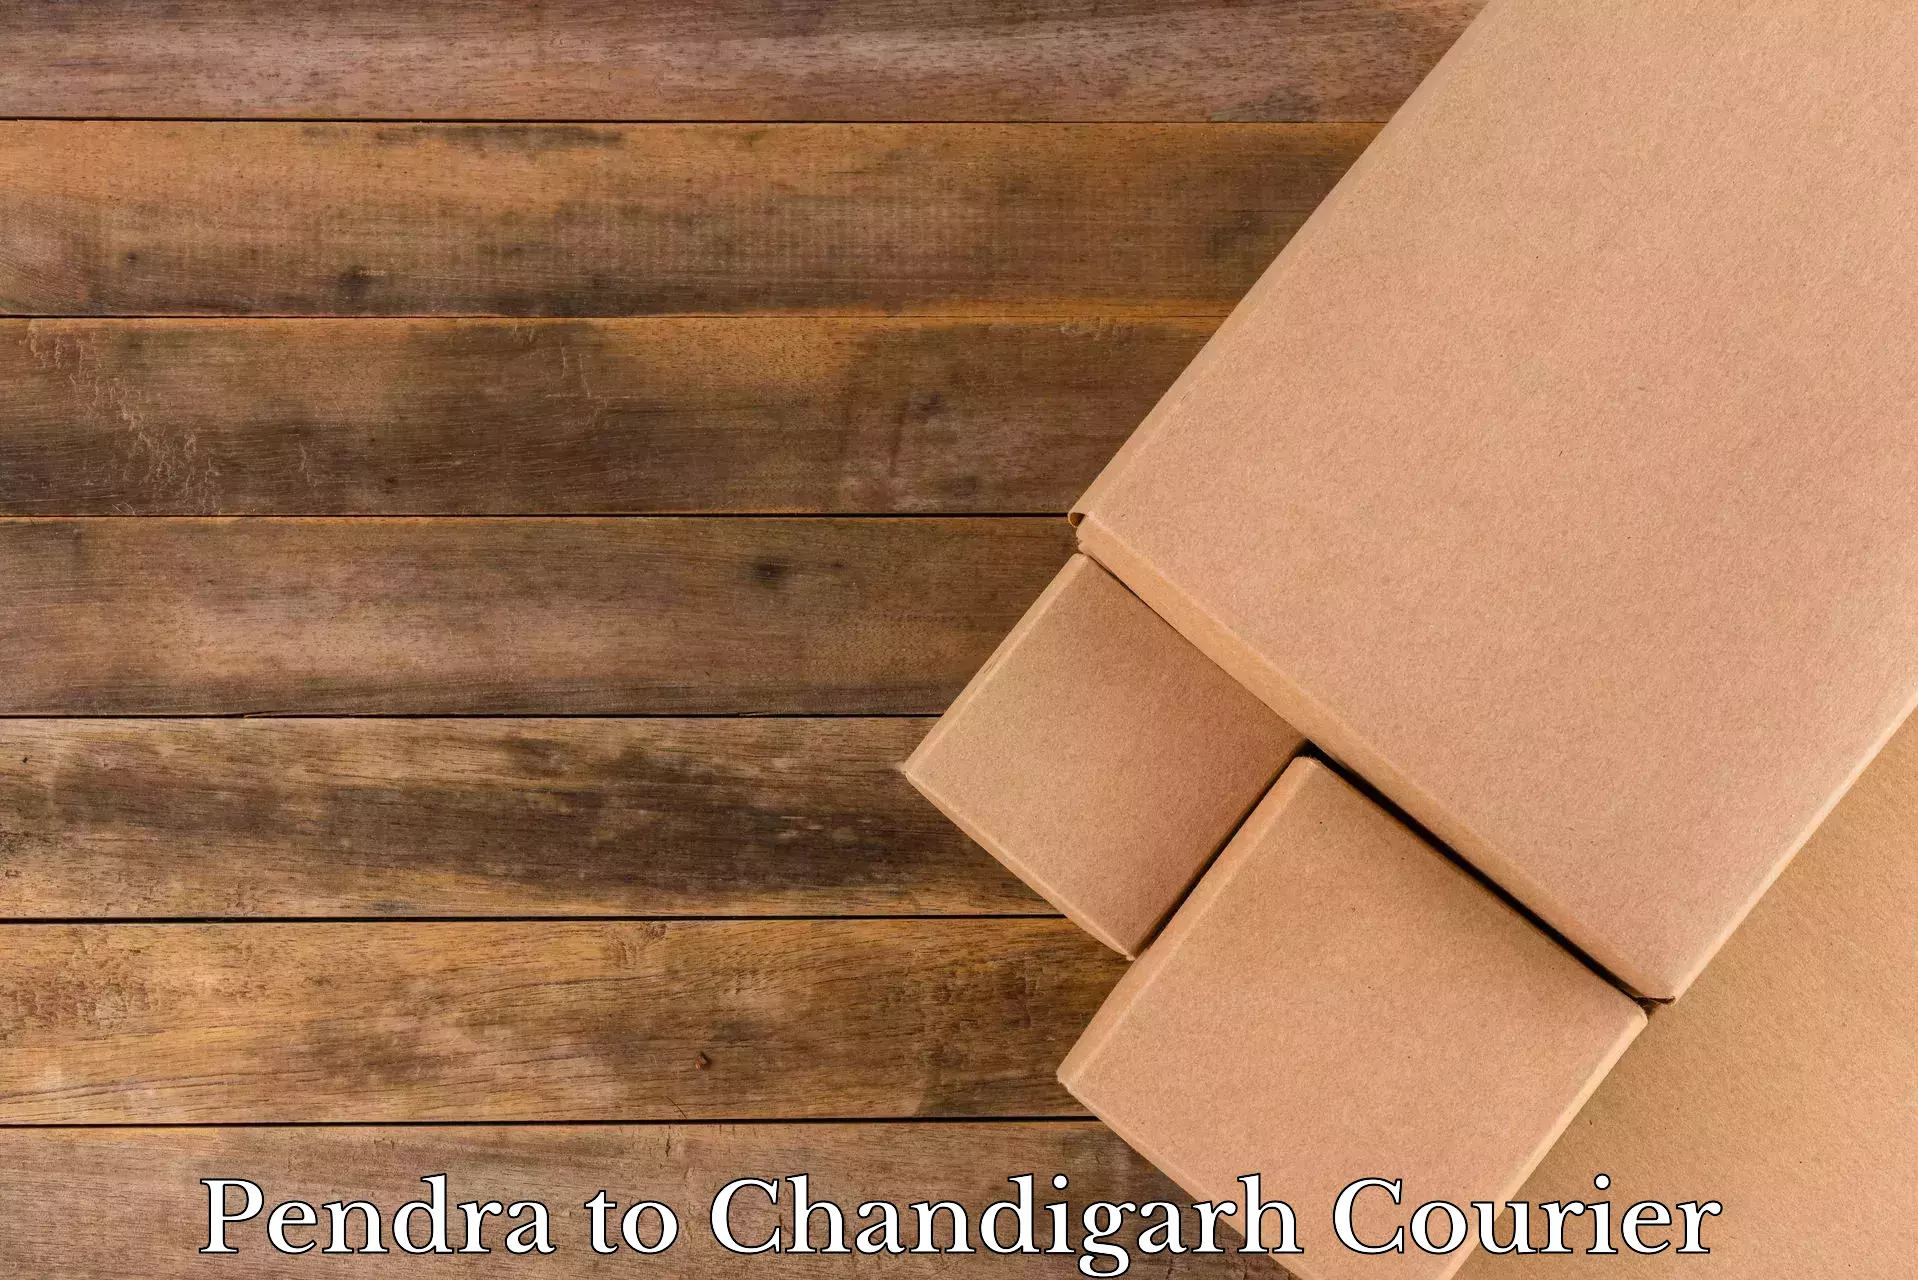 Furniture delivery service Pendra to Chandigarh